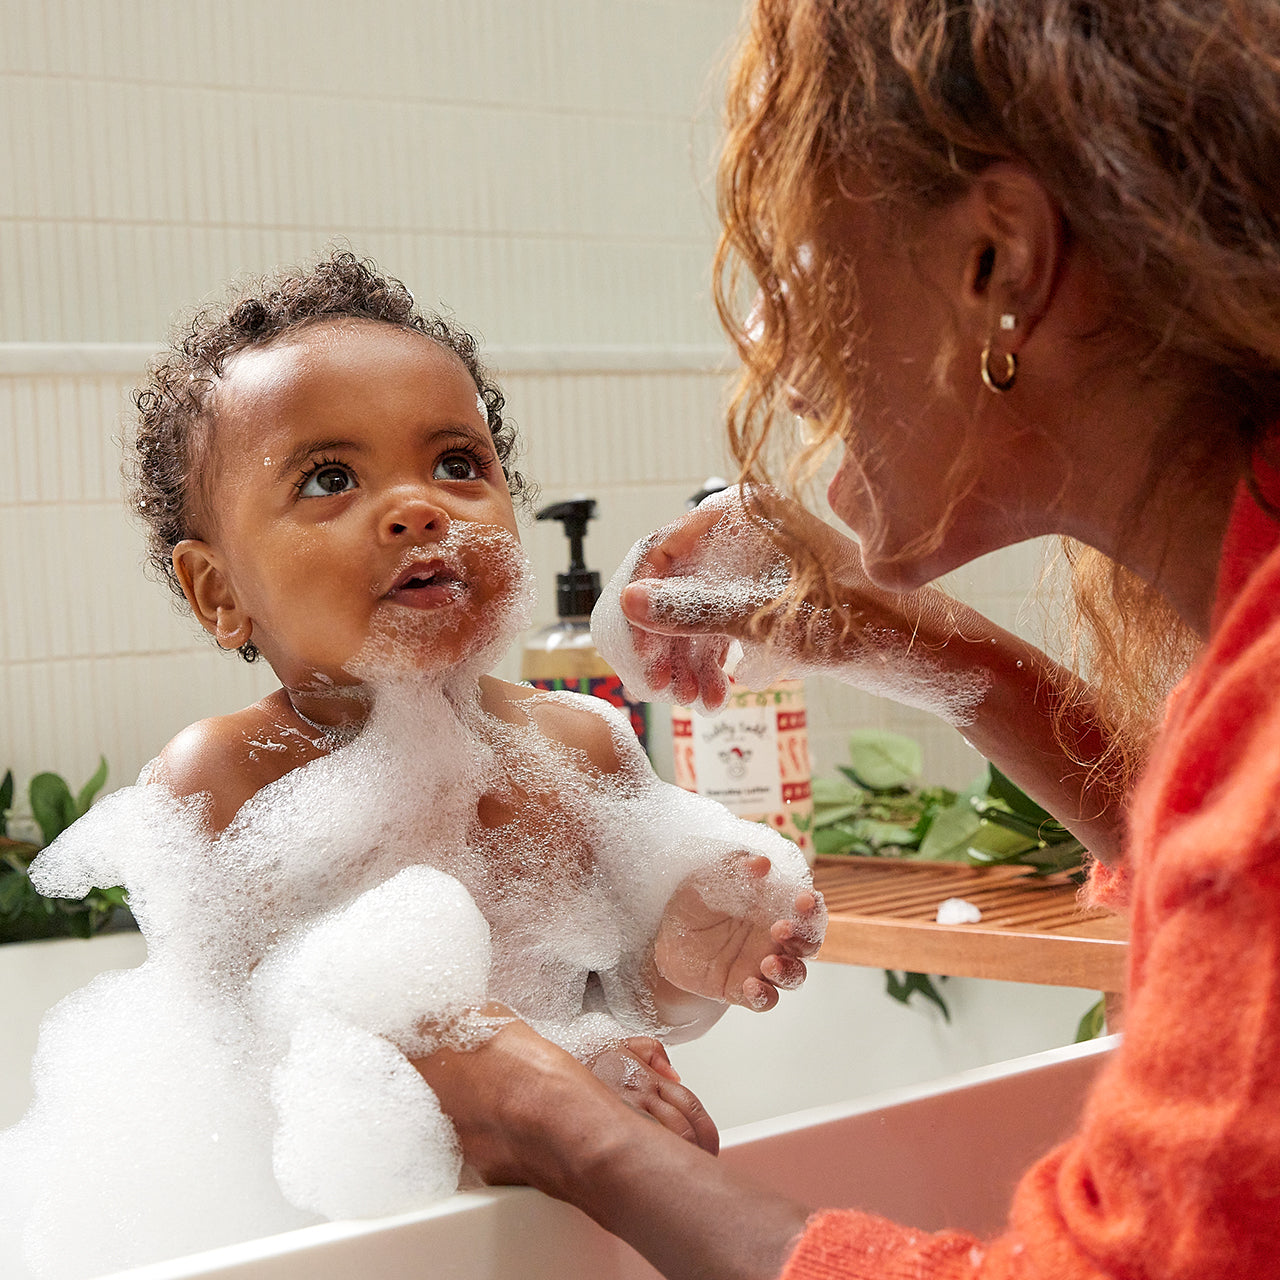 A baby covered in bubbles is taking a bath with his mom in the bathtub.